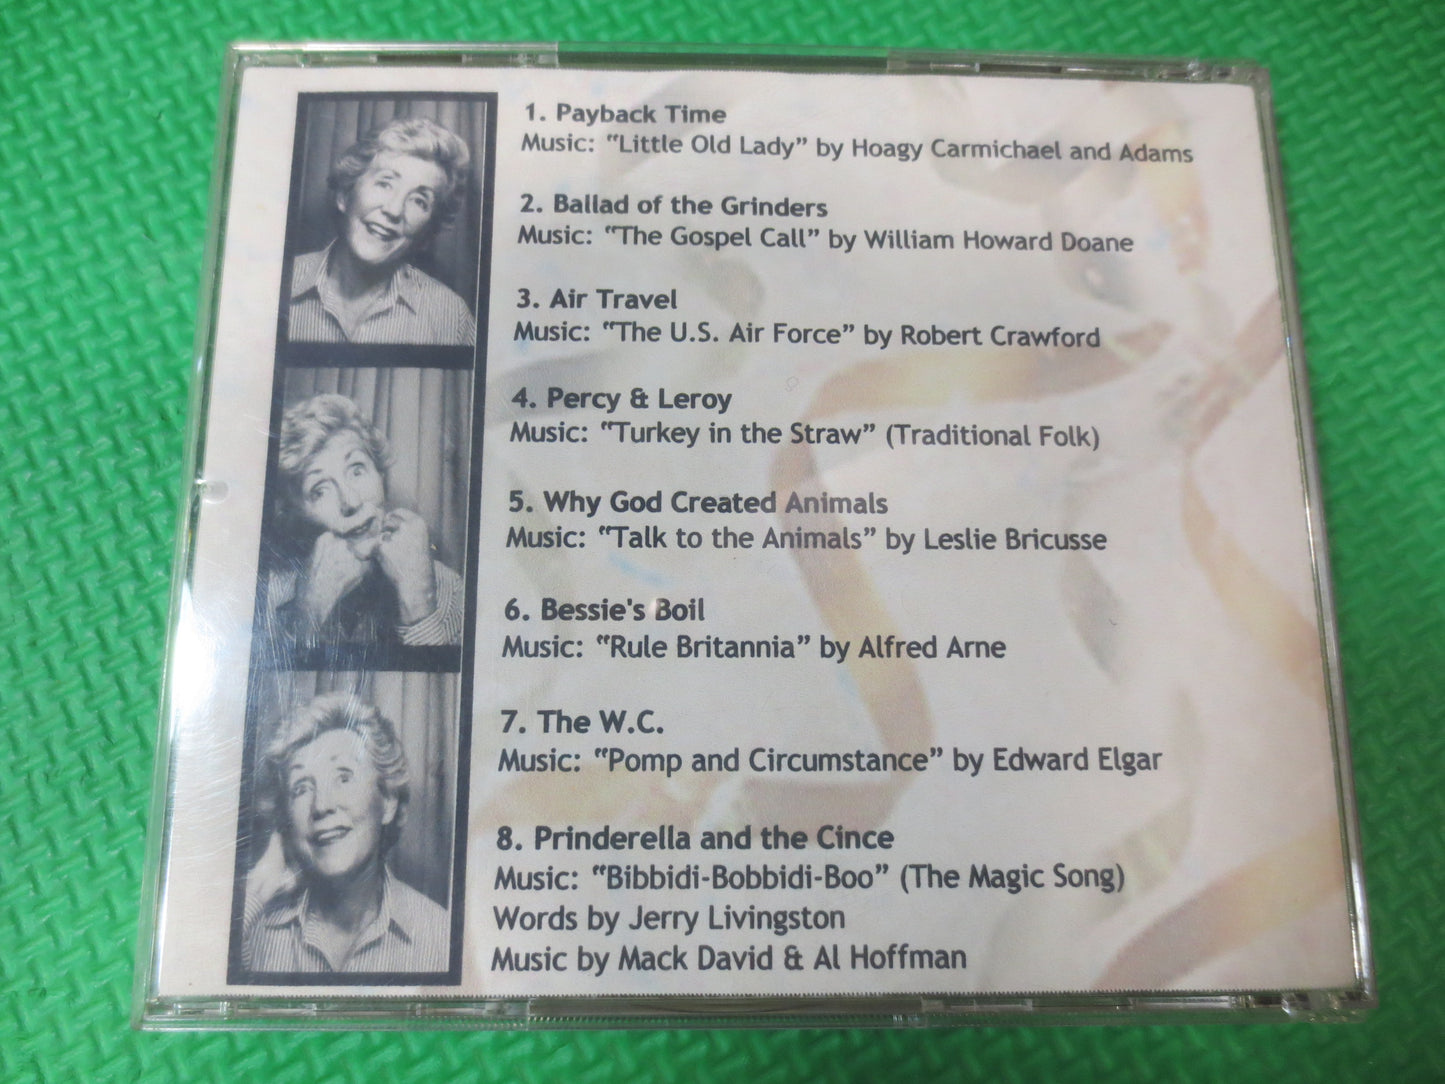 JUNE McKAY, Yarns and TWISTED Tales, June McKay Lp, June McKay Cd, Vintage Compact Disc, June McKay Album, Compact Disc